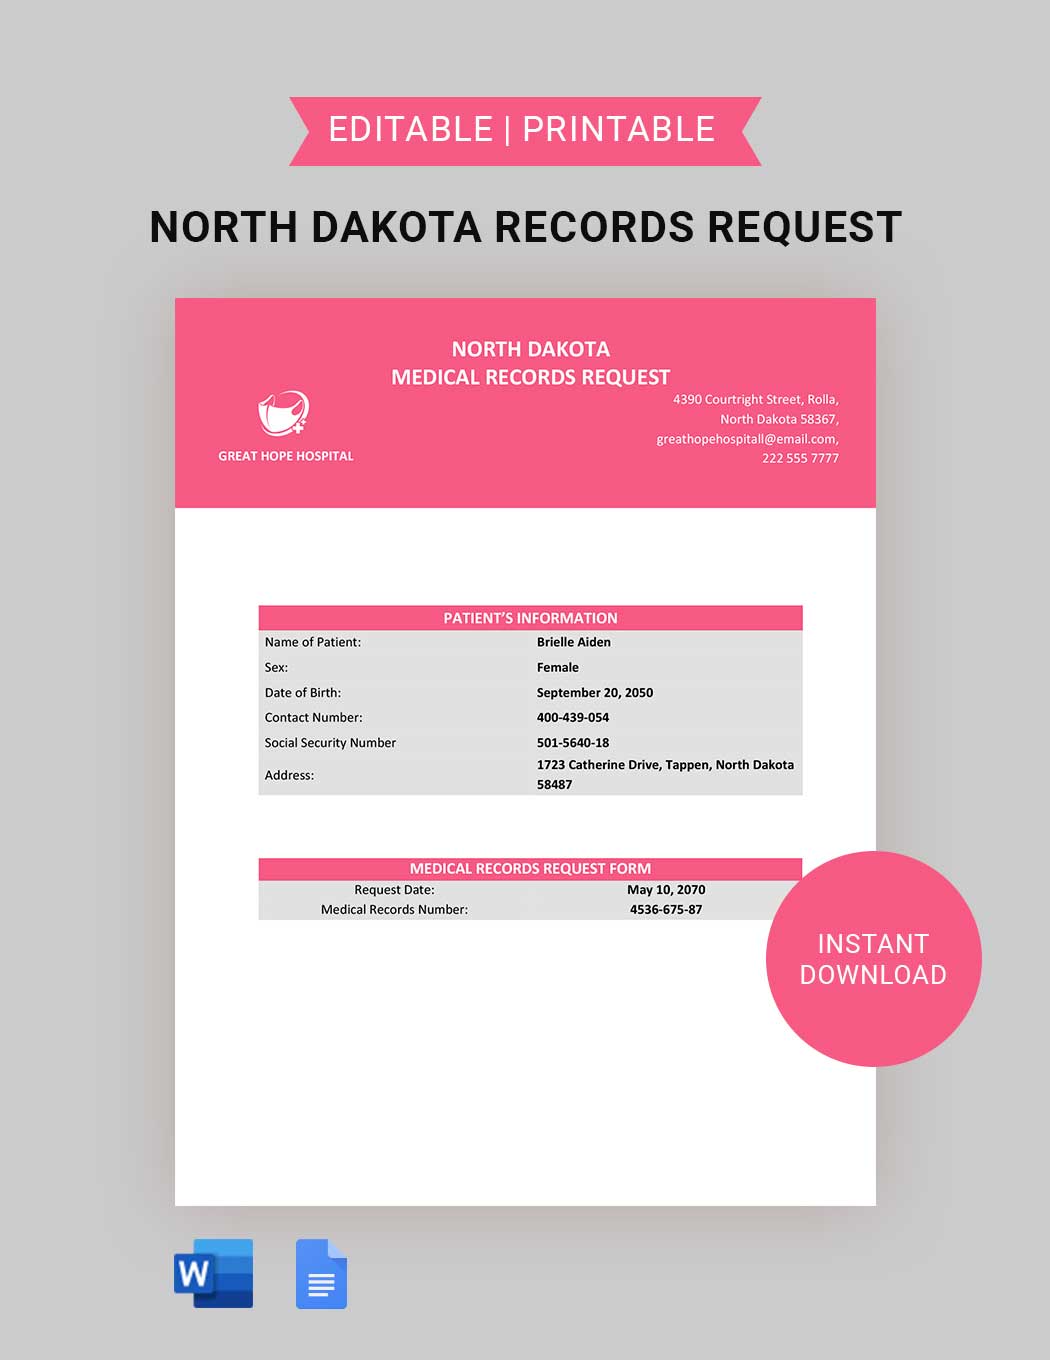 North Dakota Medical Records Request Template in Word, Google Docs